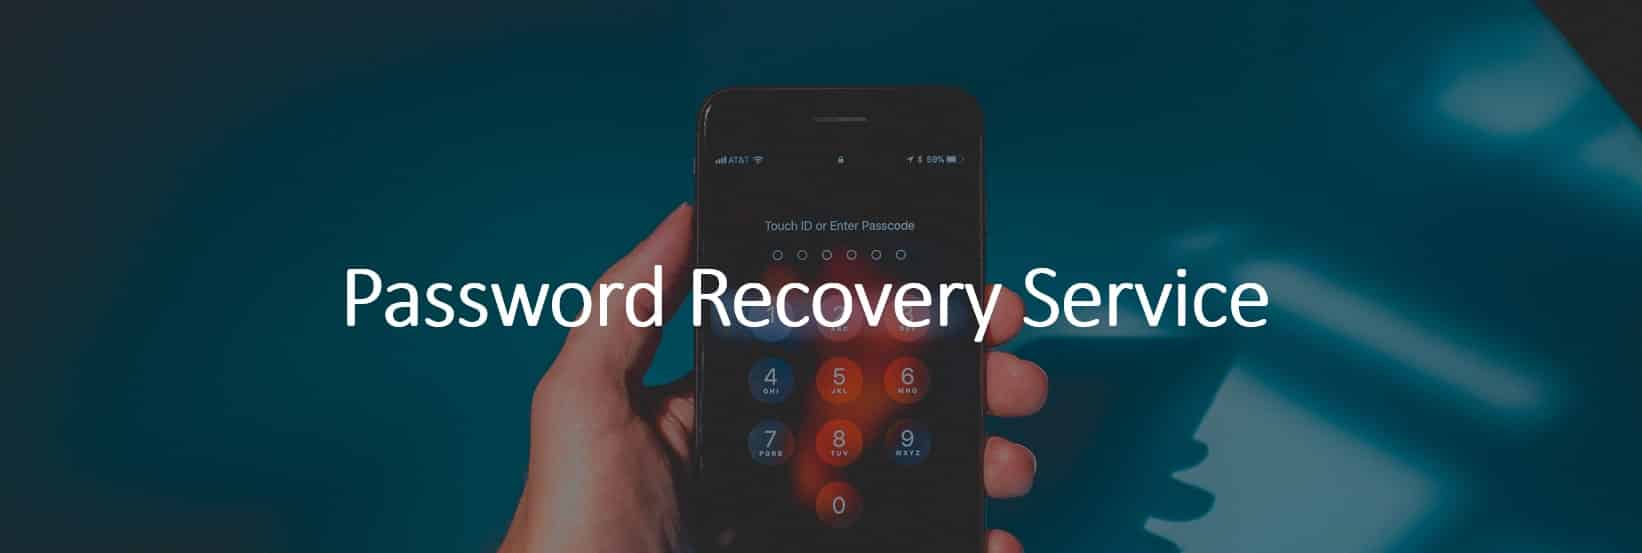 Password Recovery Service